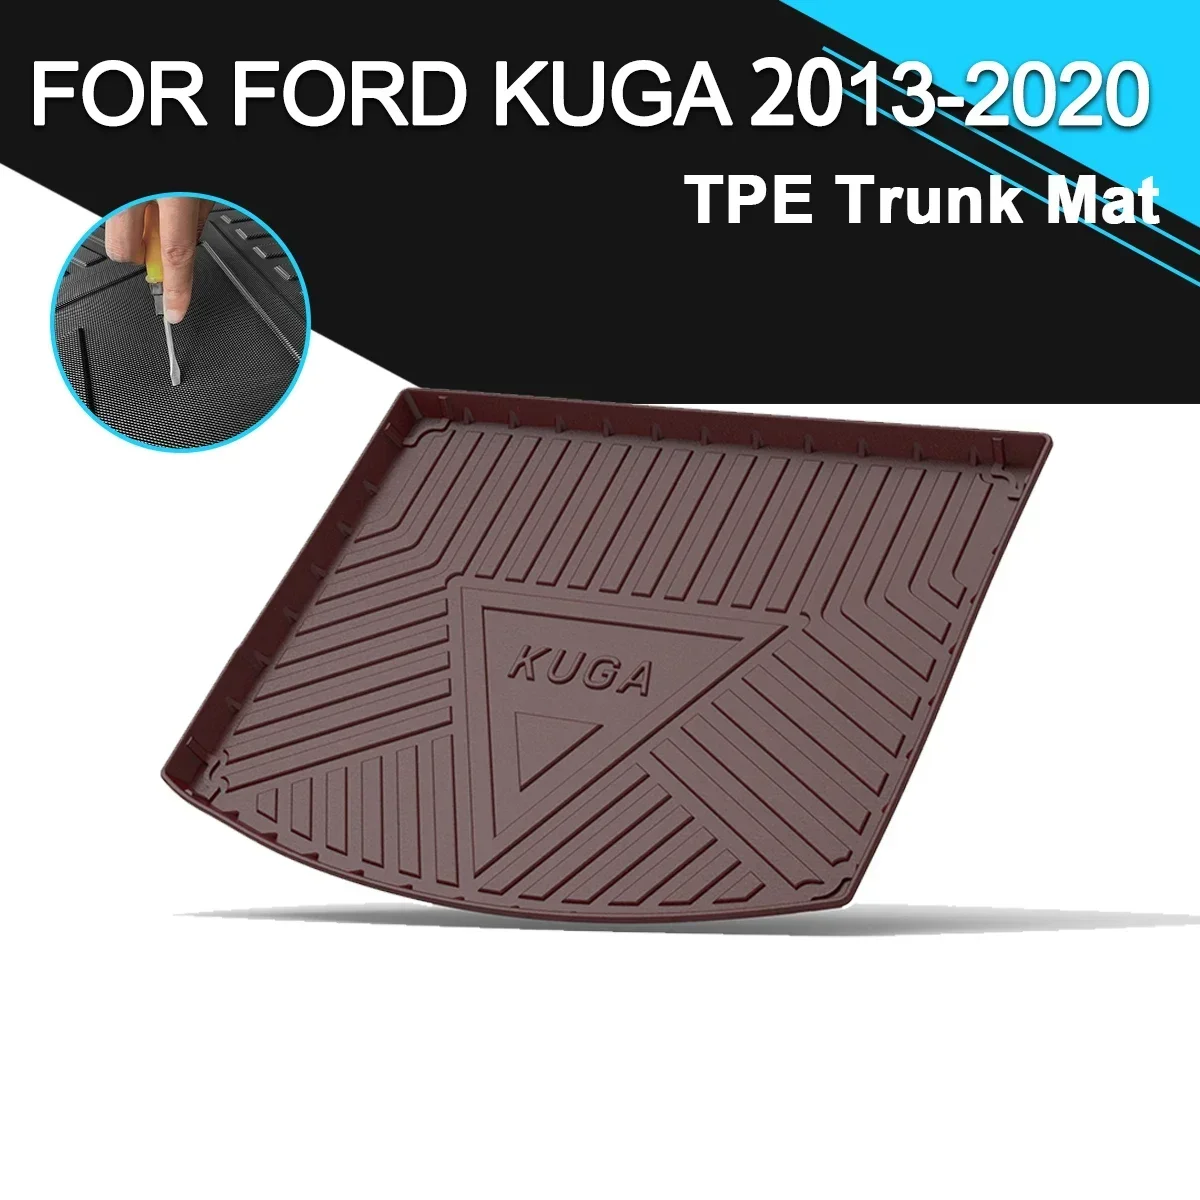 

For Ford Kuga 2013-2020 Car Rear Trunk Cover Mat Rubber TPE Non-Slip Waterproof Cargo Liner Accessories